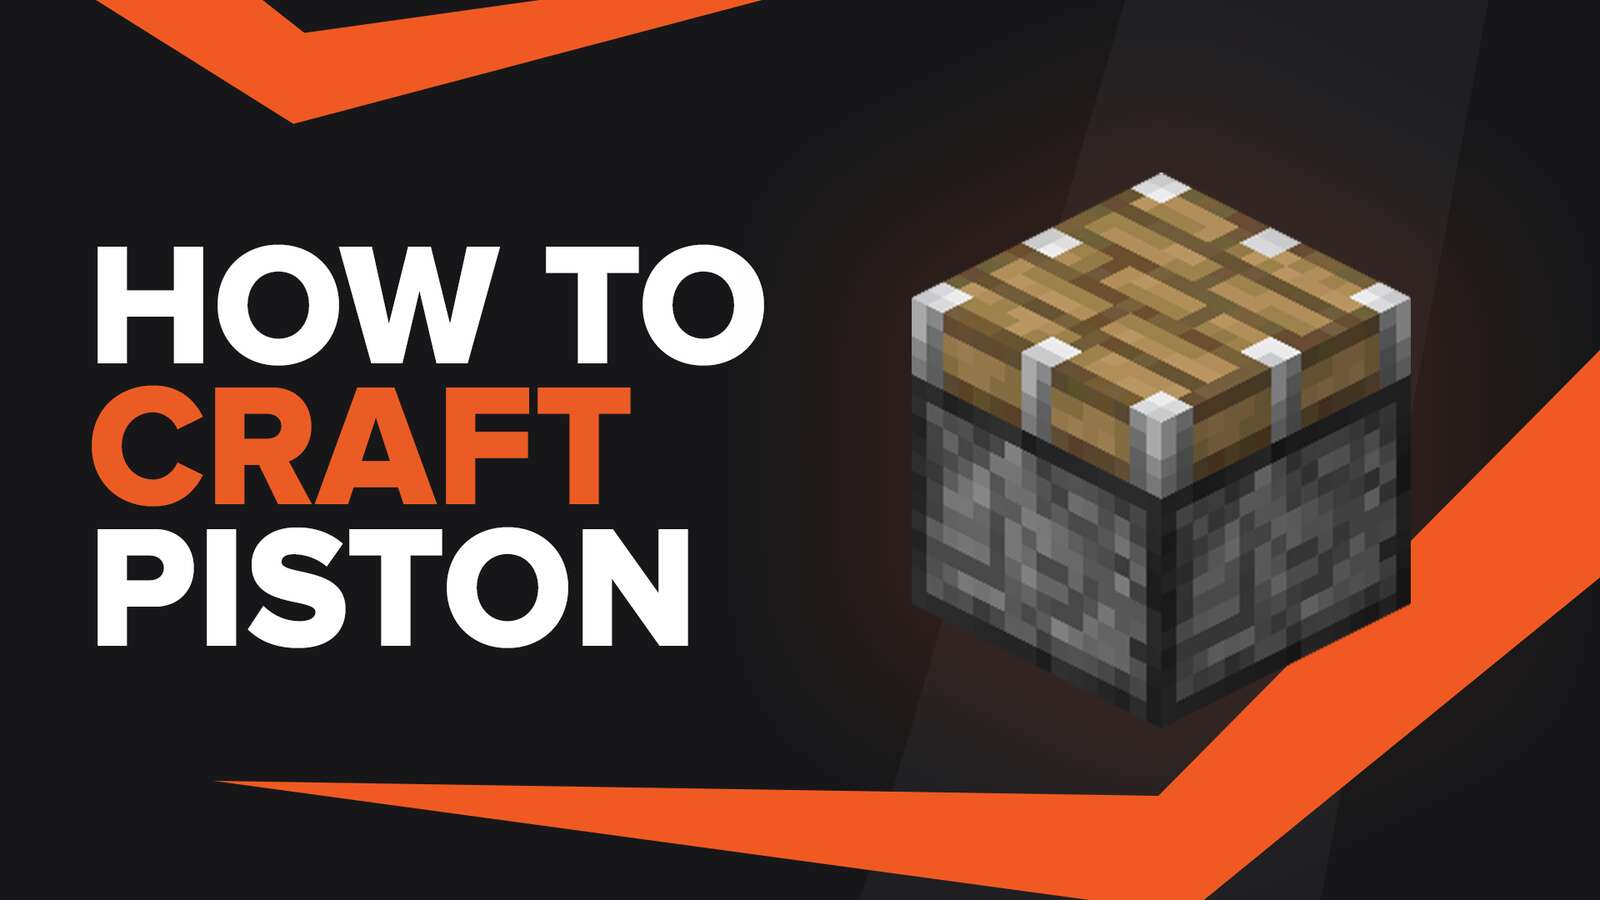 How To Make Piston In Minecraft